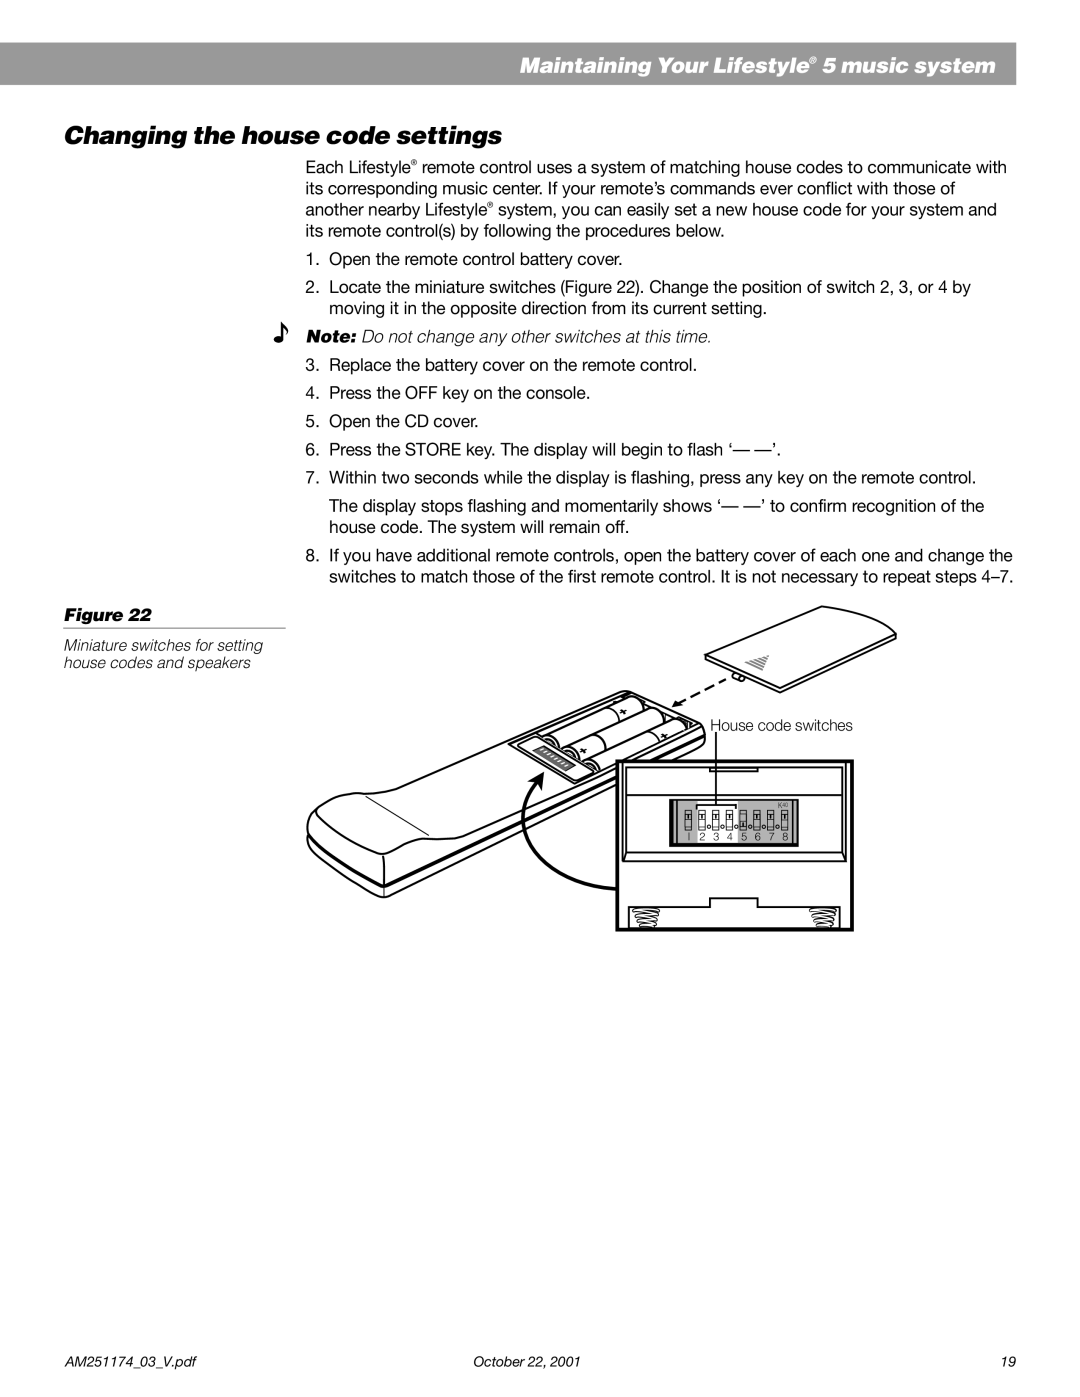 Bose manual Changing the house code settings, Maintaining Your Lifestyle 5 music system 